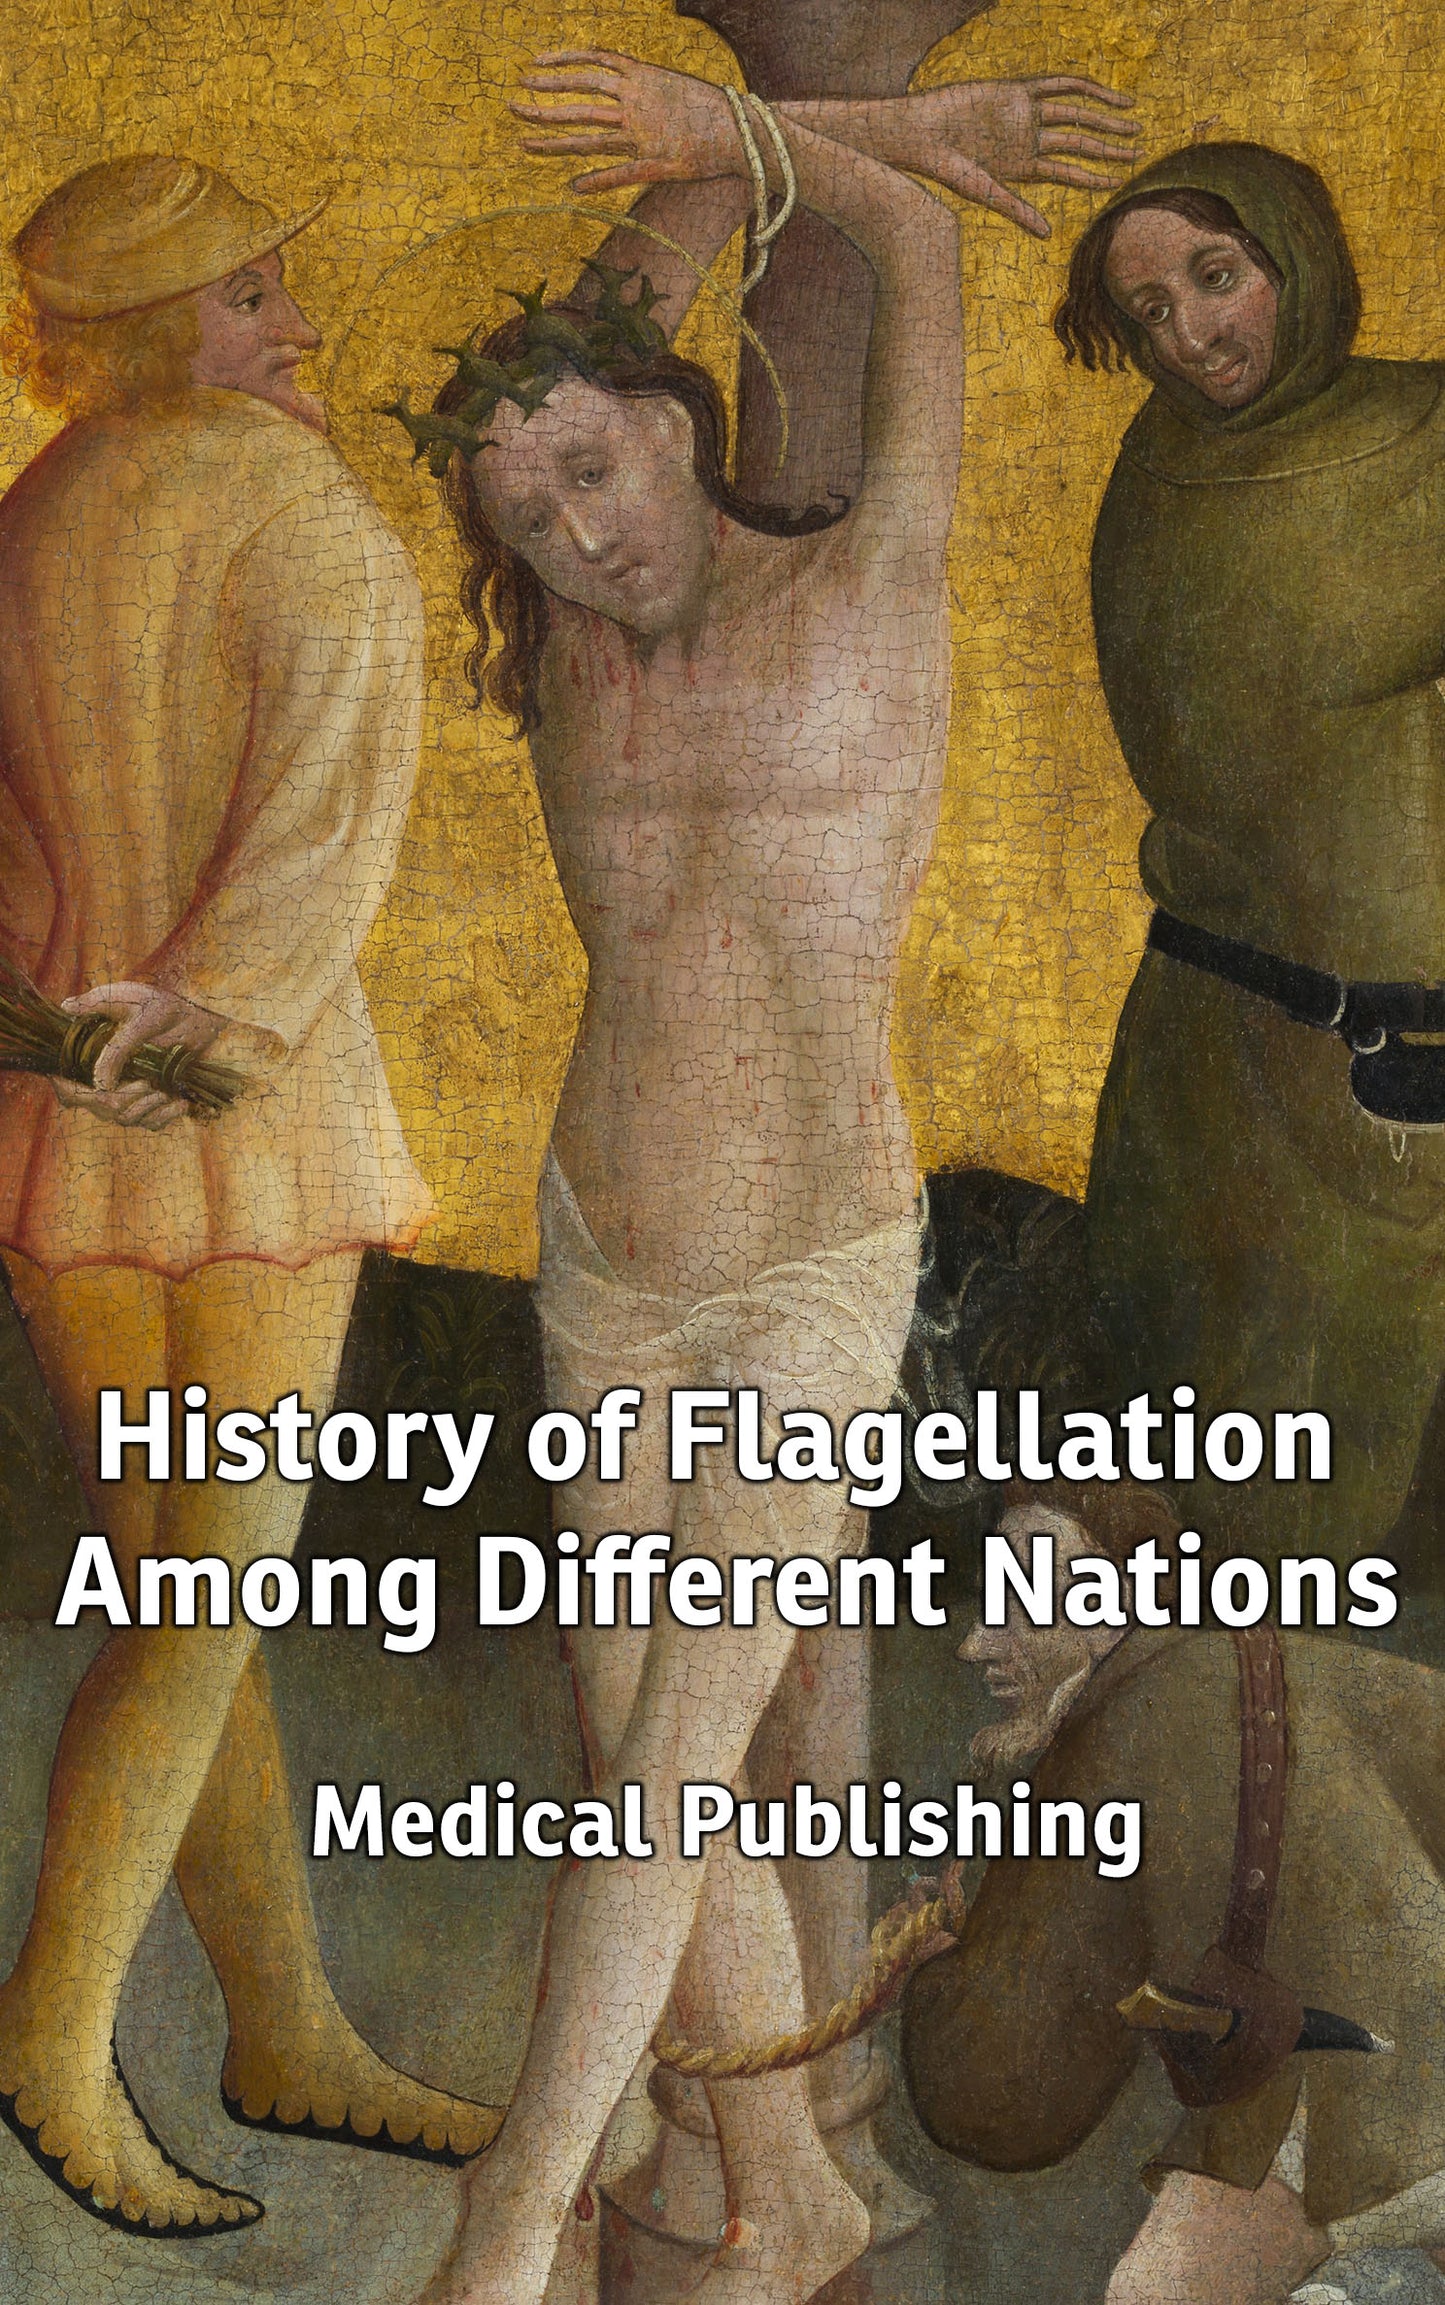 History of Flagellation Among Different Nations